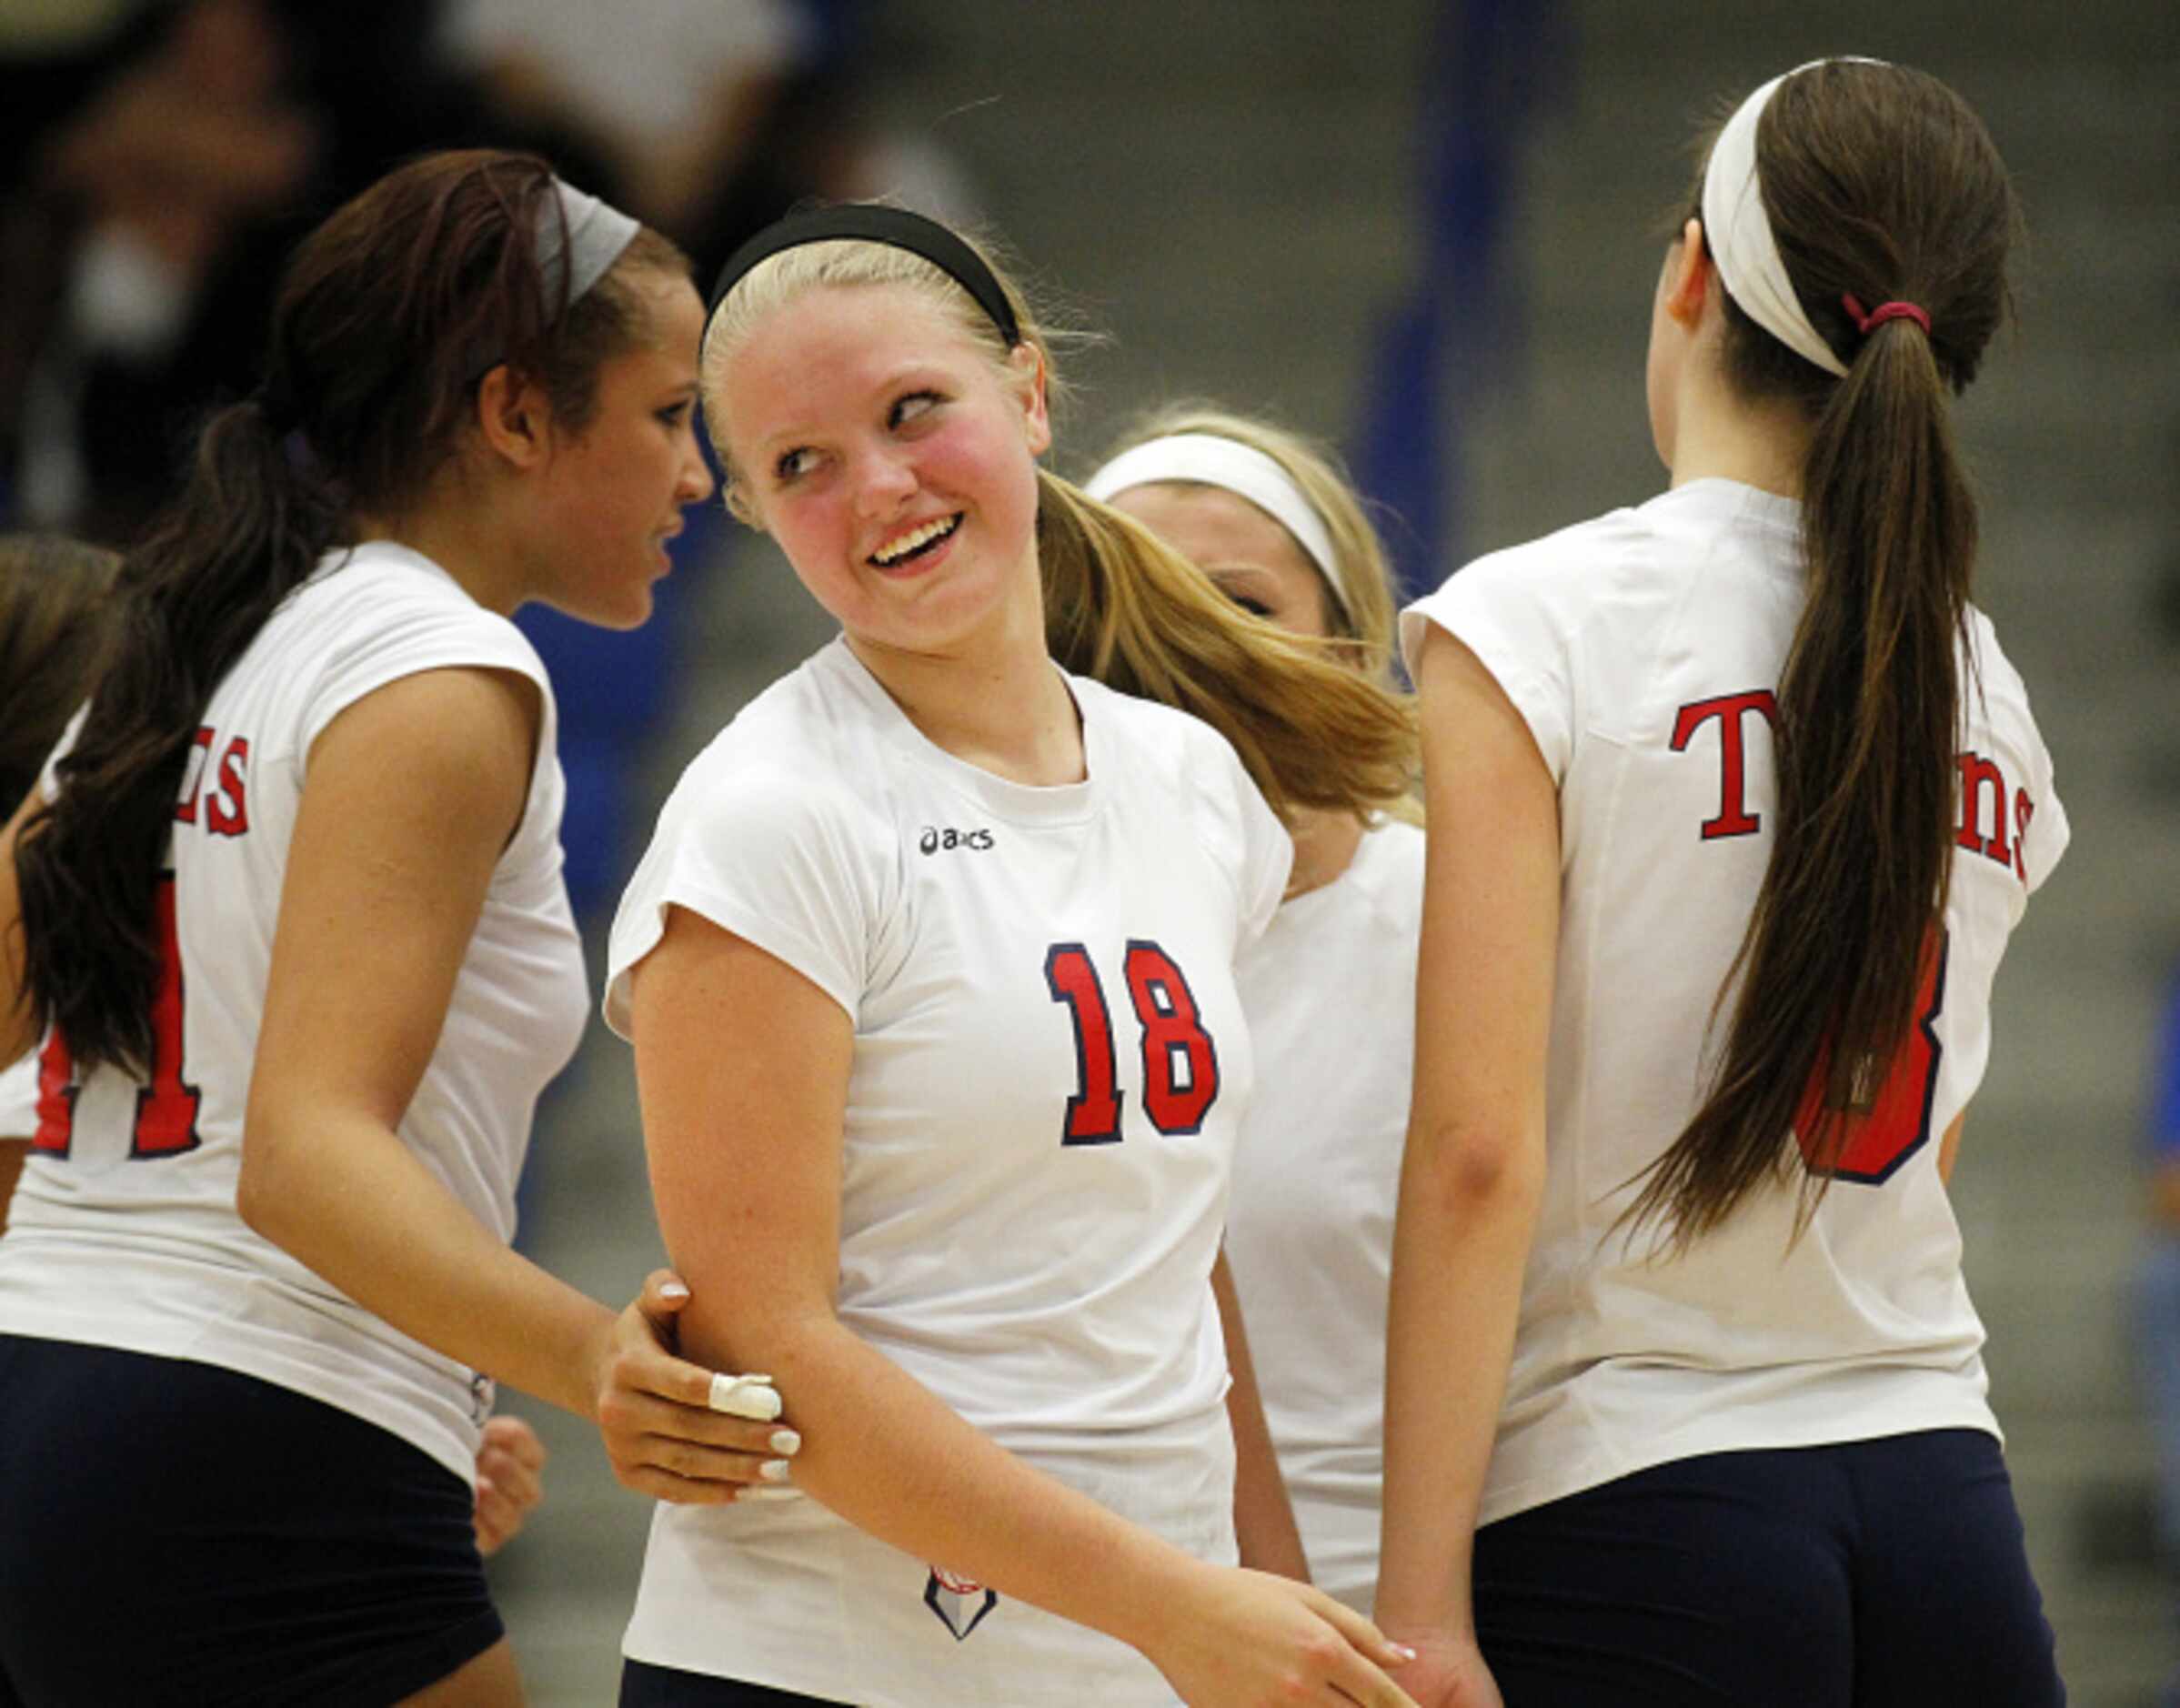 Frisco Centennial's Riley MacDonald (18) is all msiels as her team was up on Frisco High,...